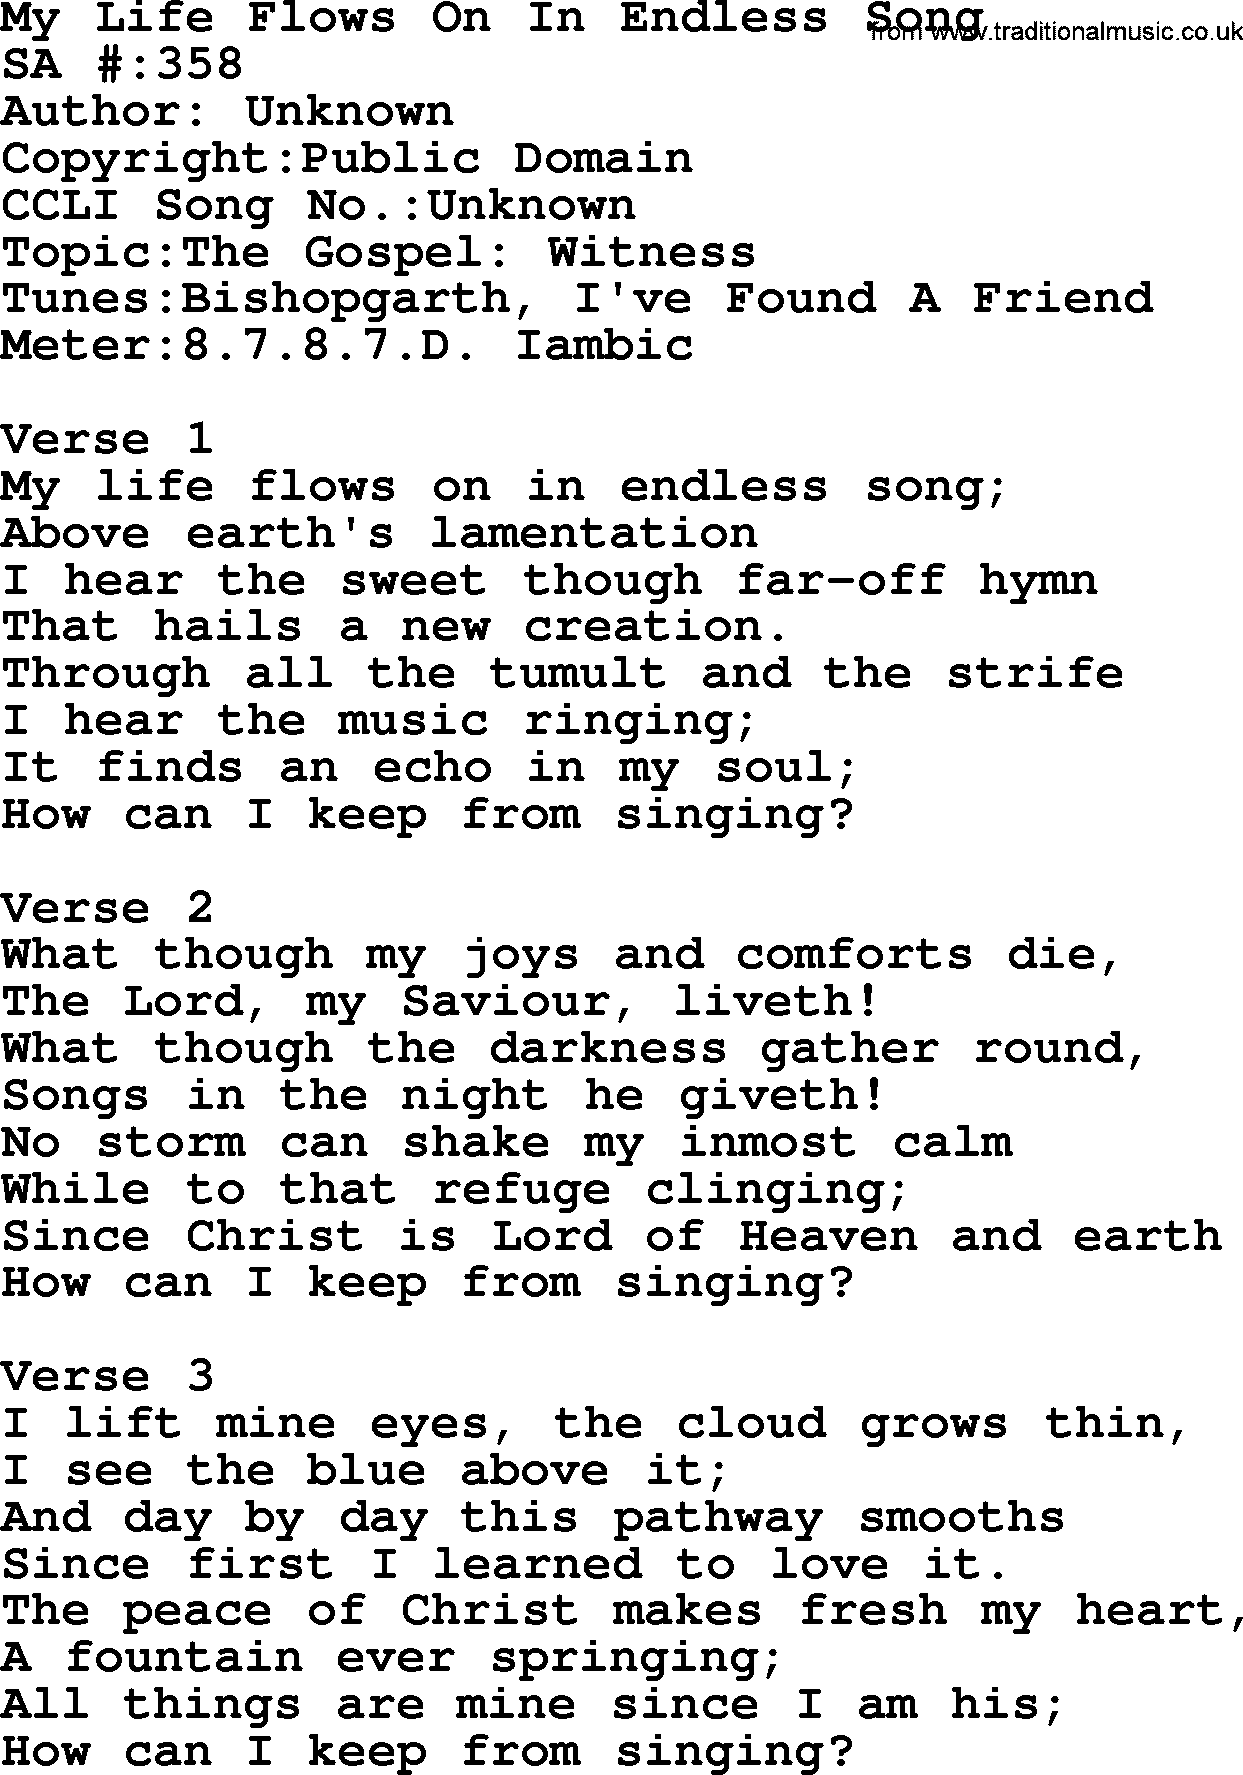 Salvation Army Hymnal, title: My Life Flows On In Endless Song, with lyrics and PDF,